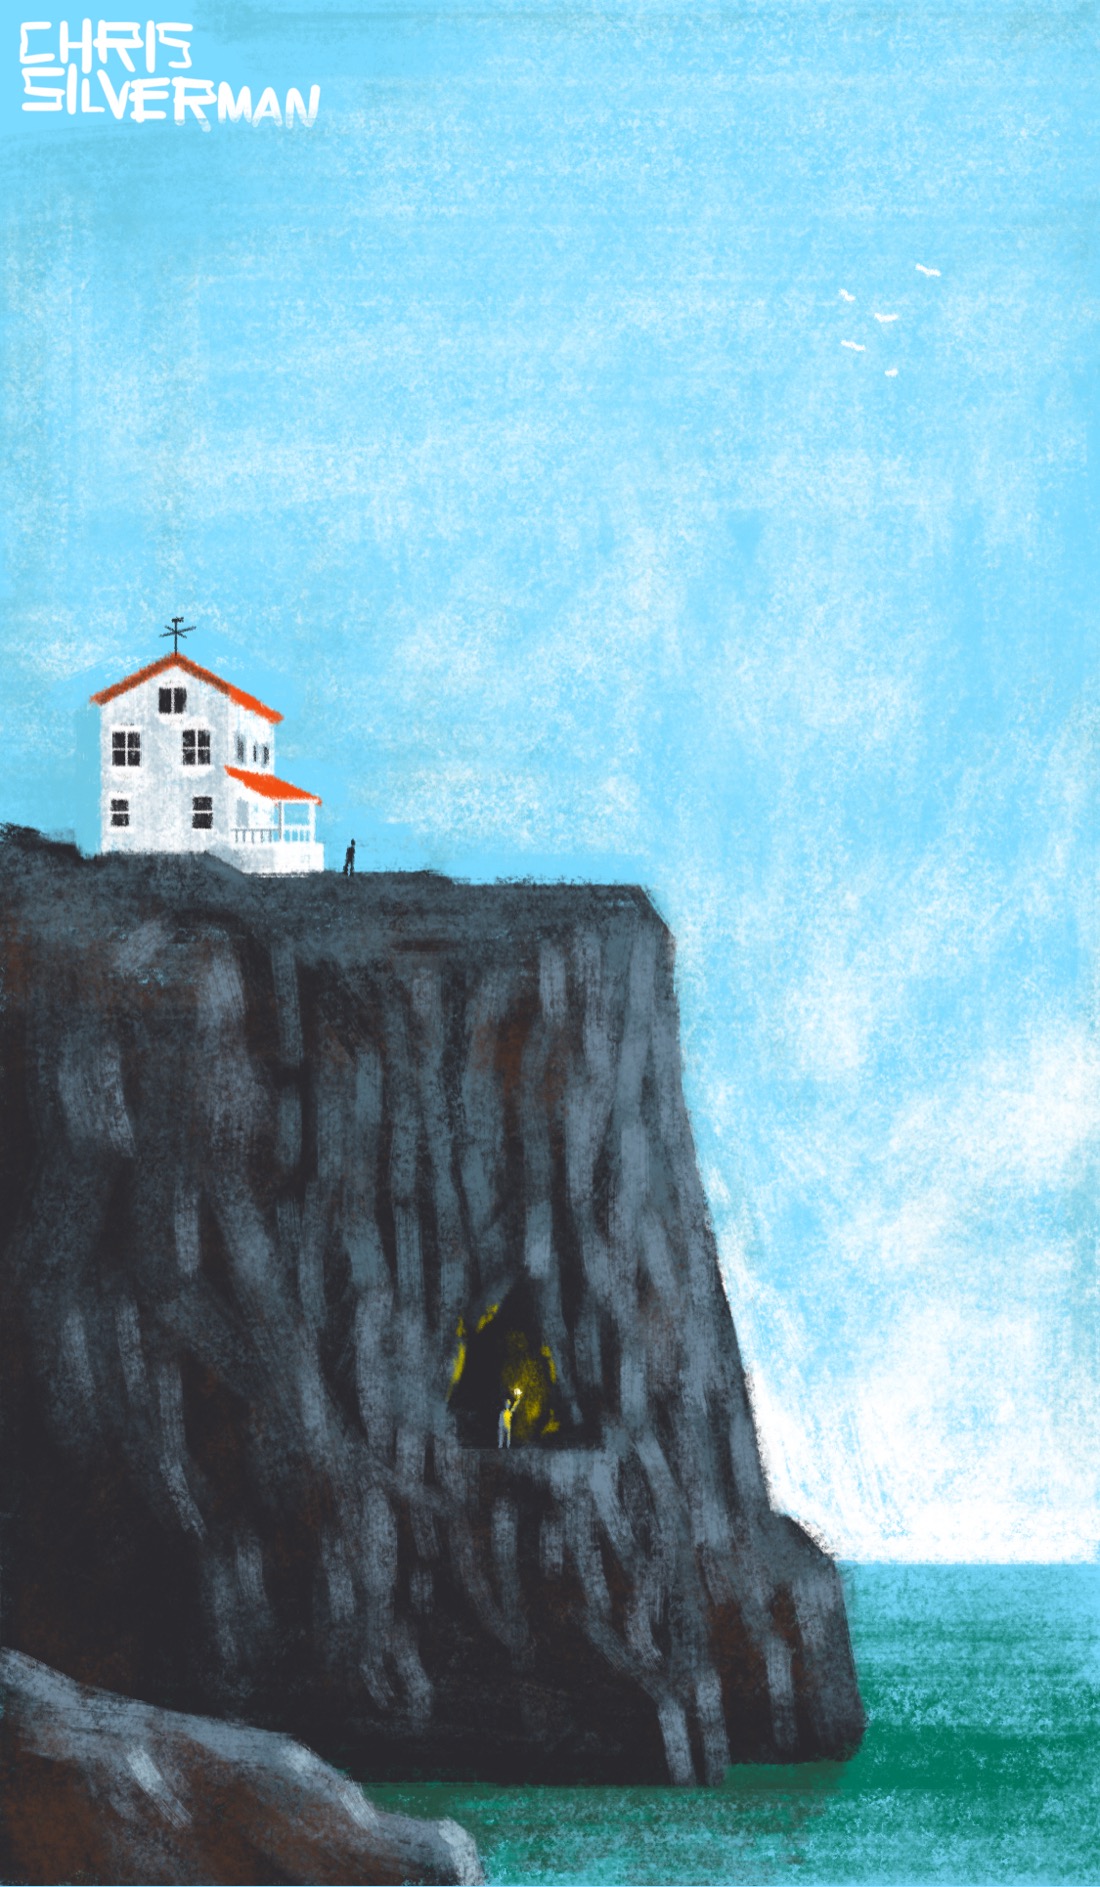 A huge, rocky cliff jutting into the ocean. At the top of the cliff, somewhat set back from the edge, is a small white house with an orange roof. Someone is walking away from the house towards the edge of the cliff. Farther down along the side of the cliff is the large black opening of a cave. Someone is standing in the cave, holding up a lantern that is illuminating the sides of the cave with yellow light. All around stretches the vast blue sky, with a scattering of seagulls in the top left. There is a hazy suggestion of white clouds on the horizon. The ocean is green.